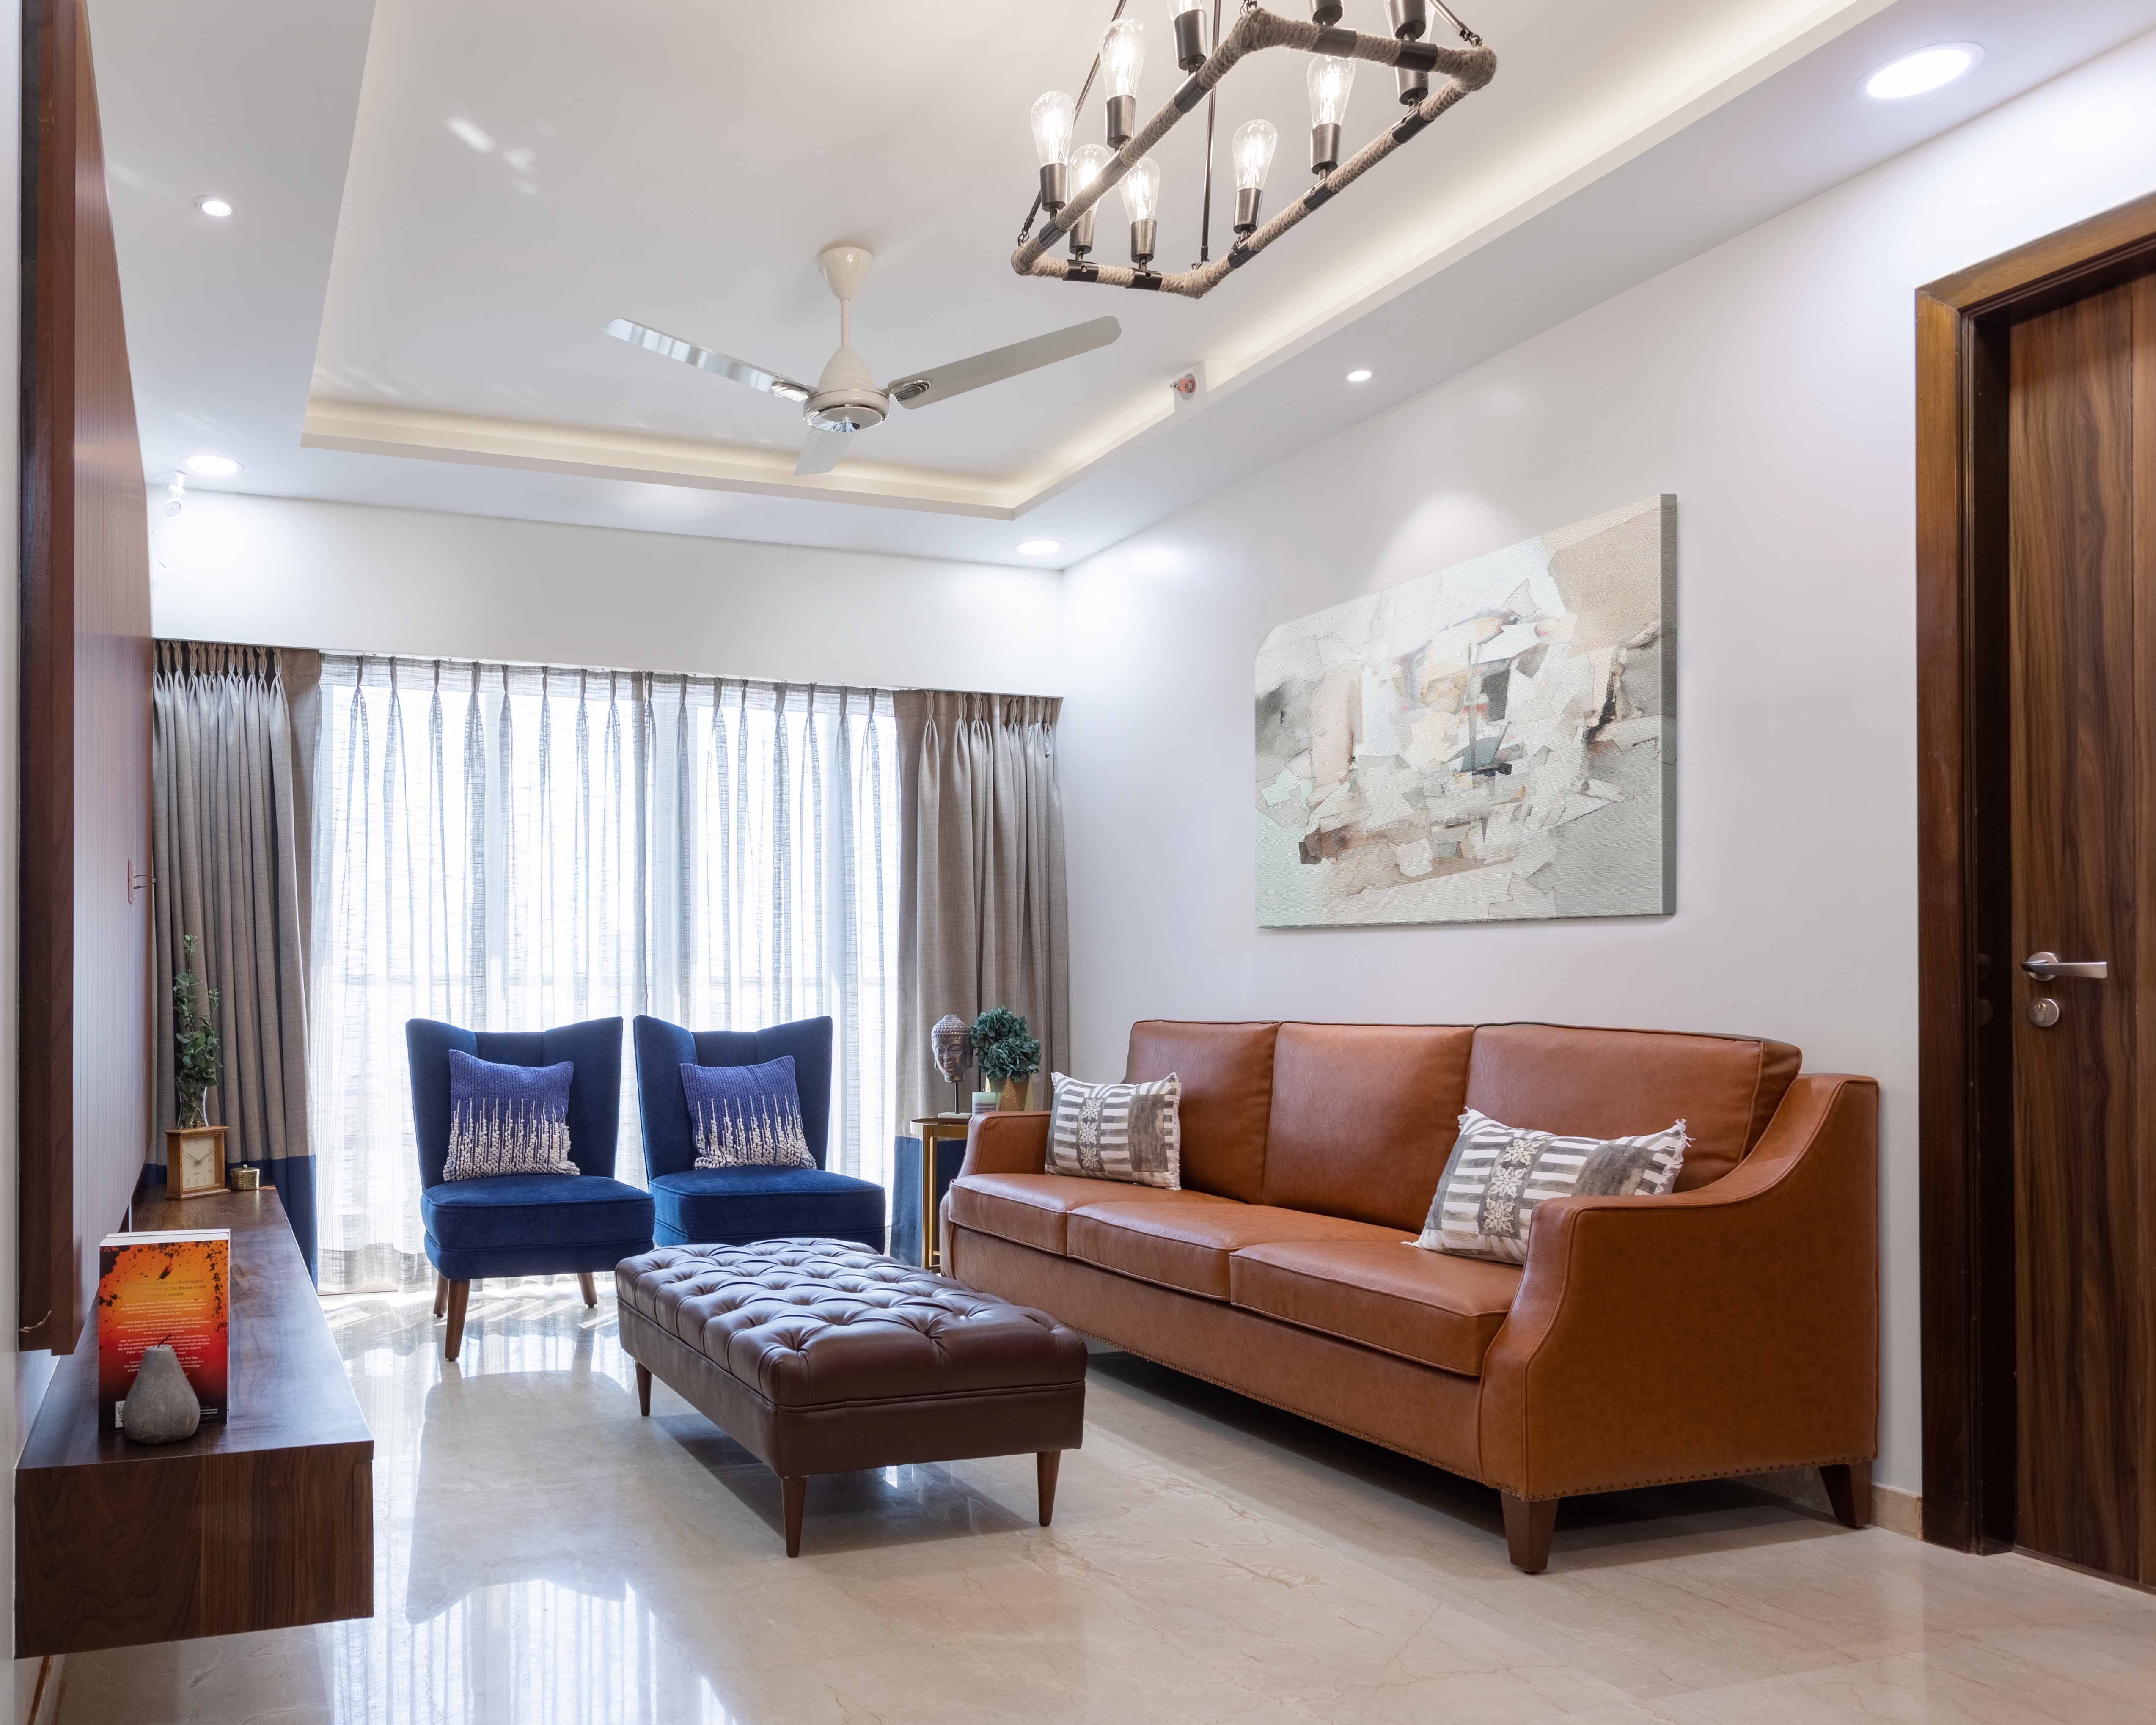 Contemporary Living Room Design With 3-Seater Brown Leather Sofa And Blue Accent Chairs